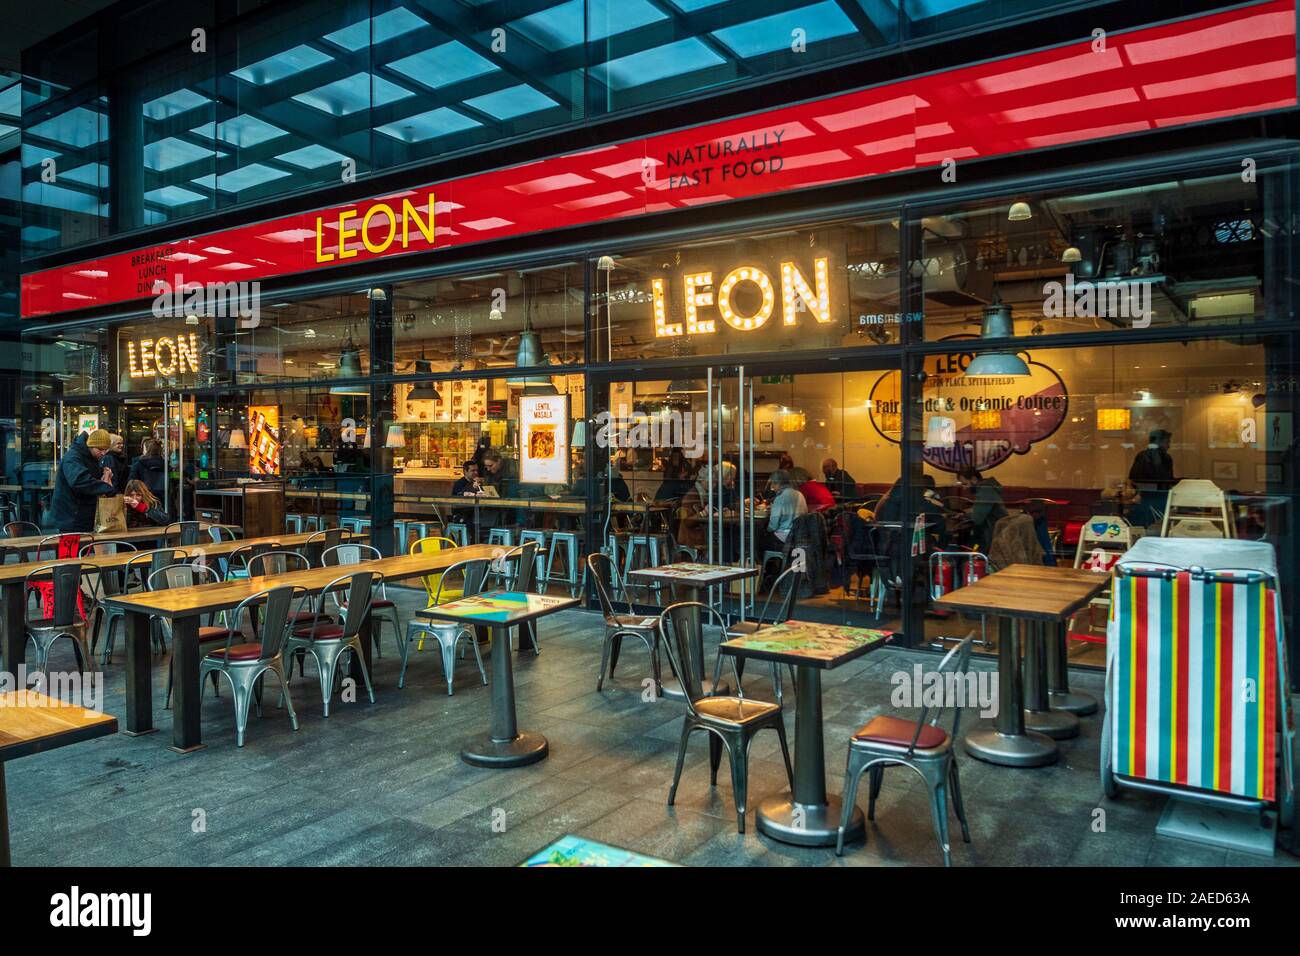 The Leon healthy & wholesome fast food restaurant in London's Spitalfields Market development in the City of London. Stock Photo